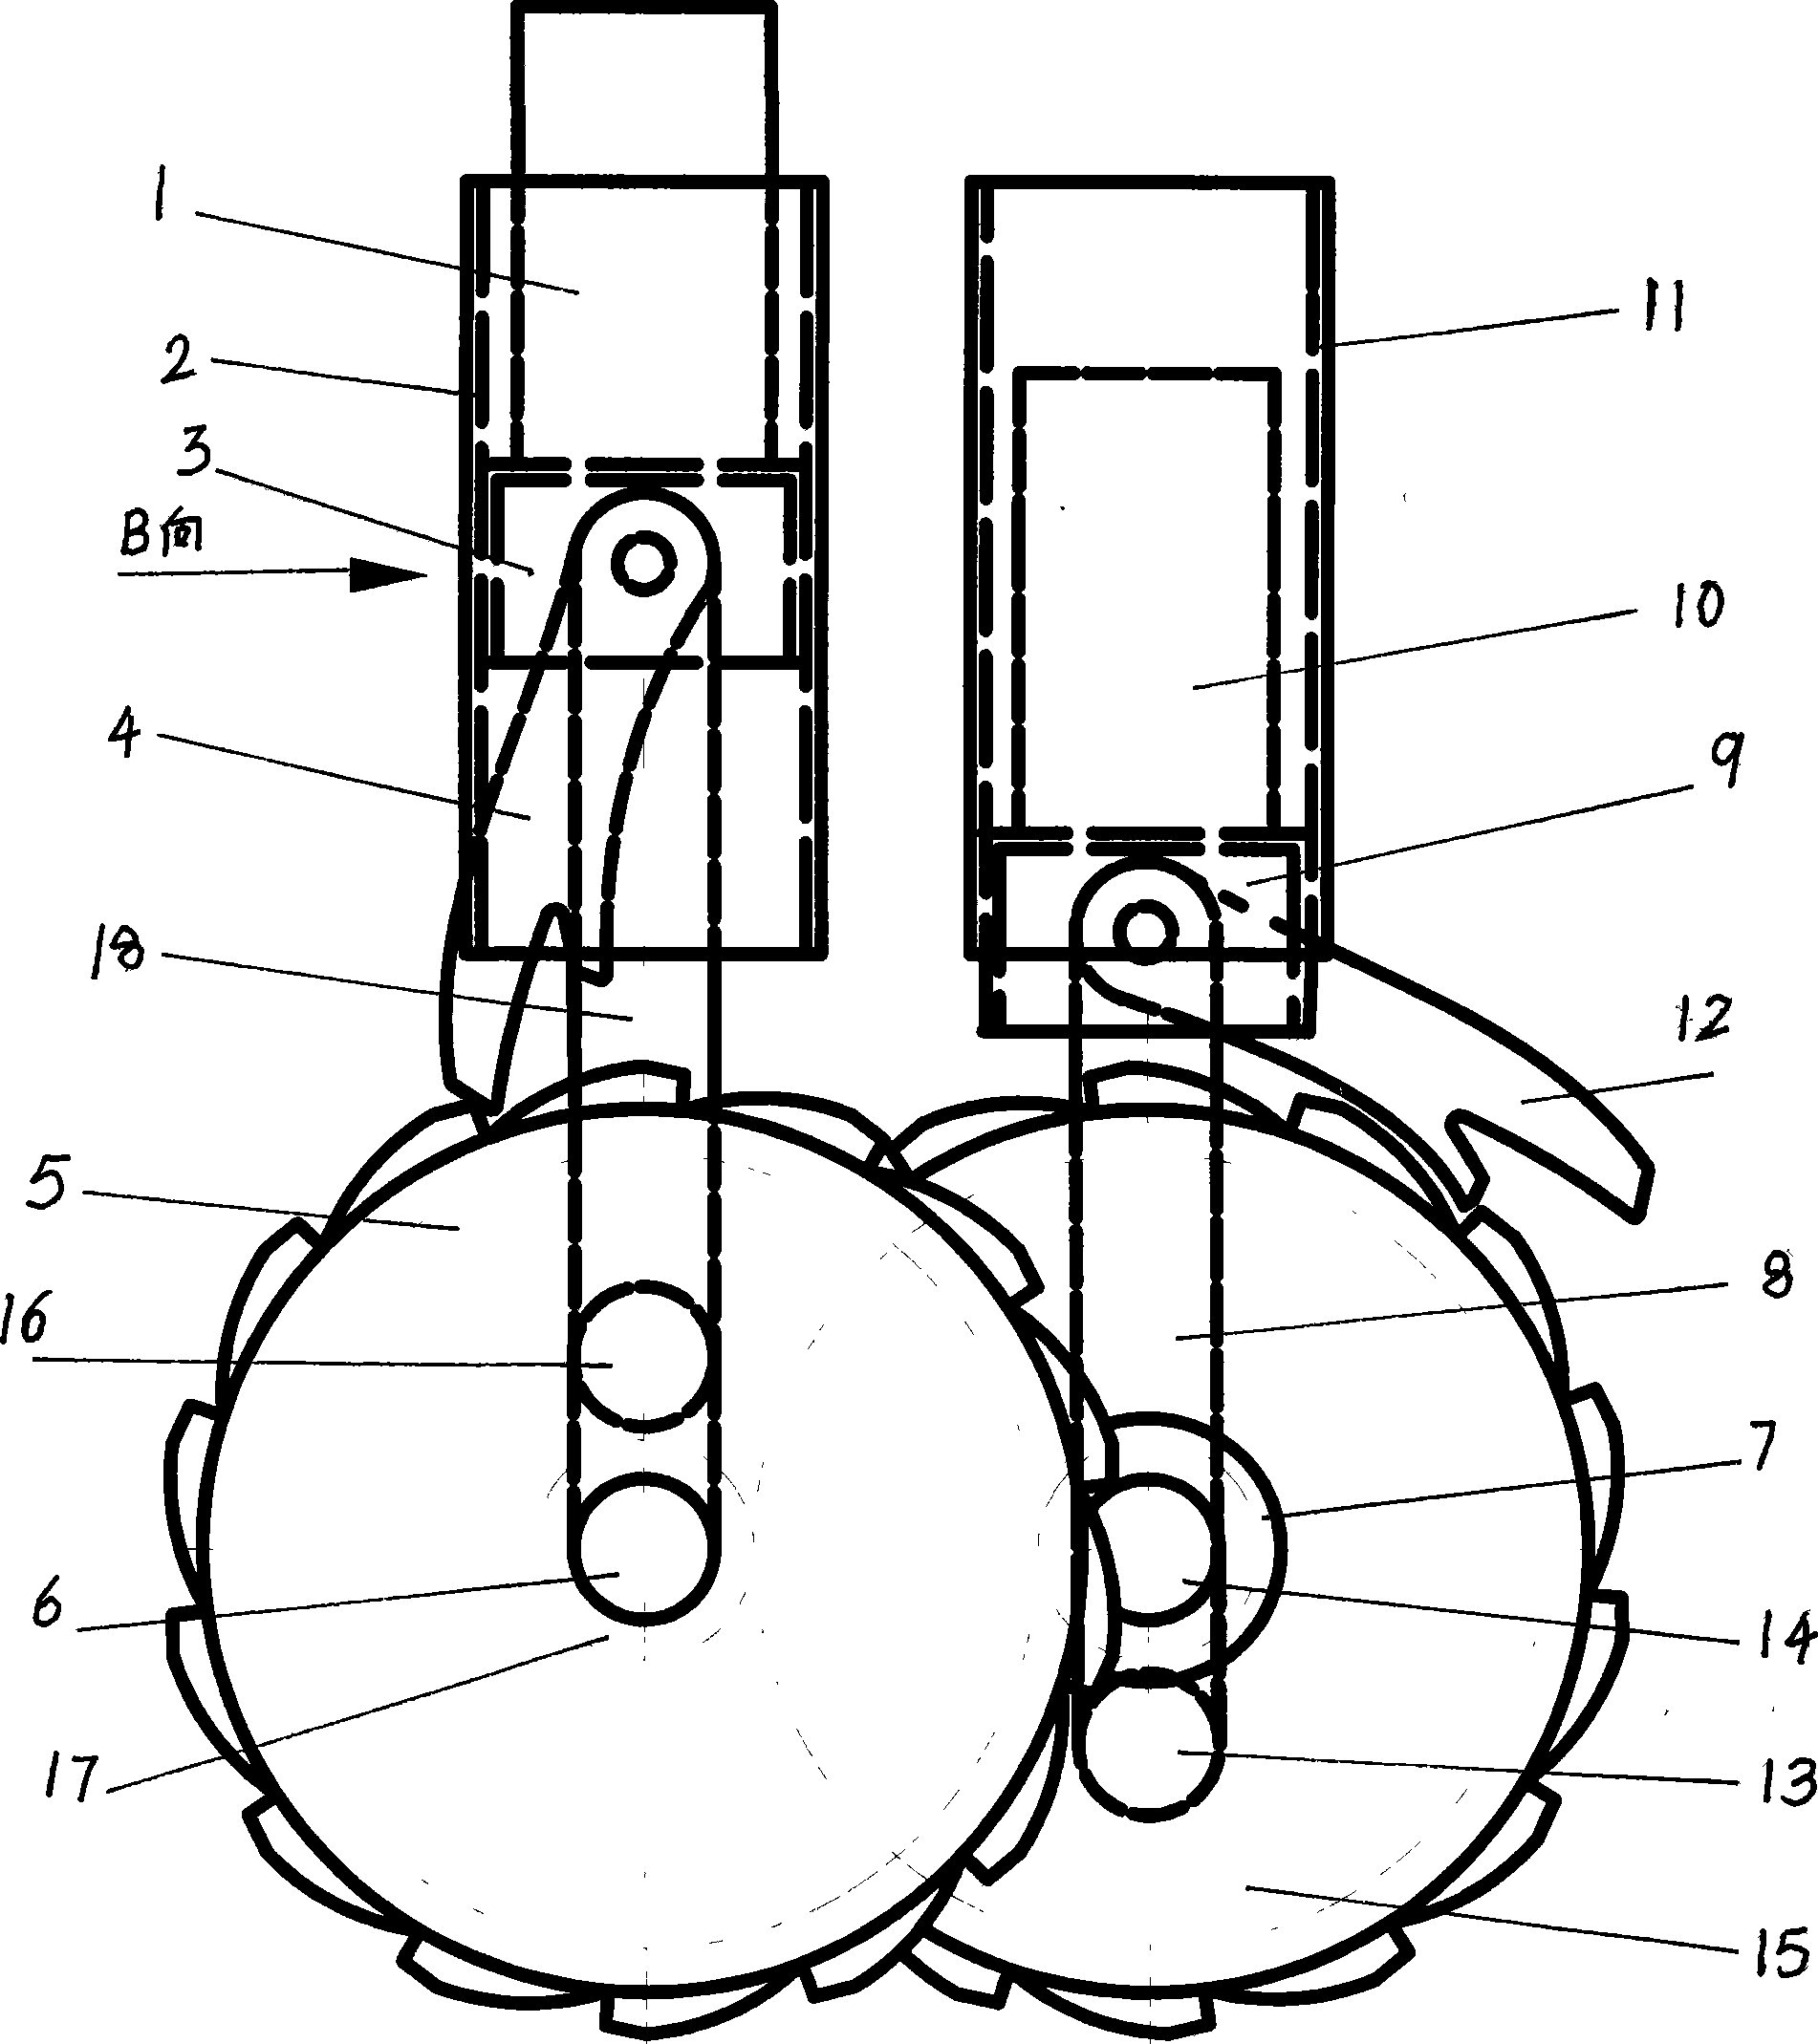 Double-cylinder mutual pressuring prime motor